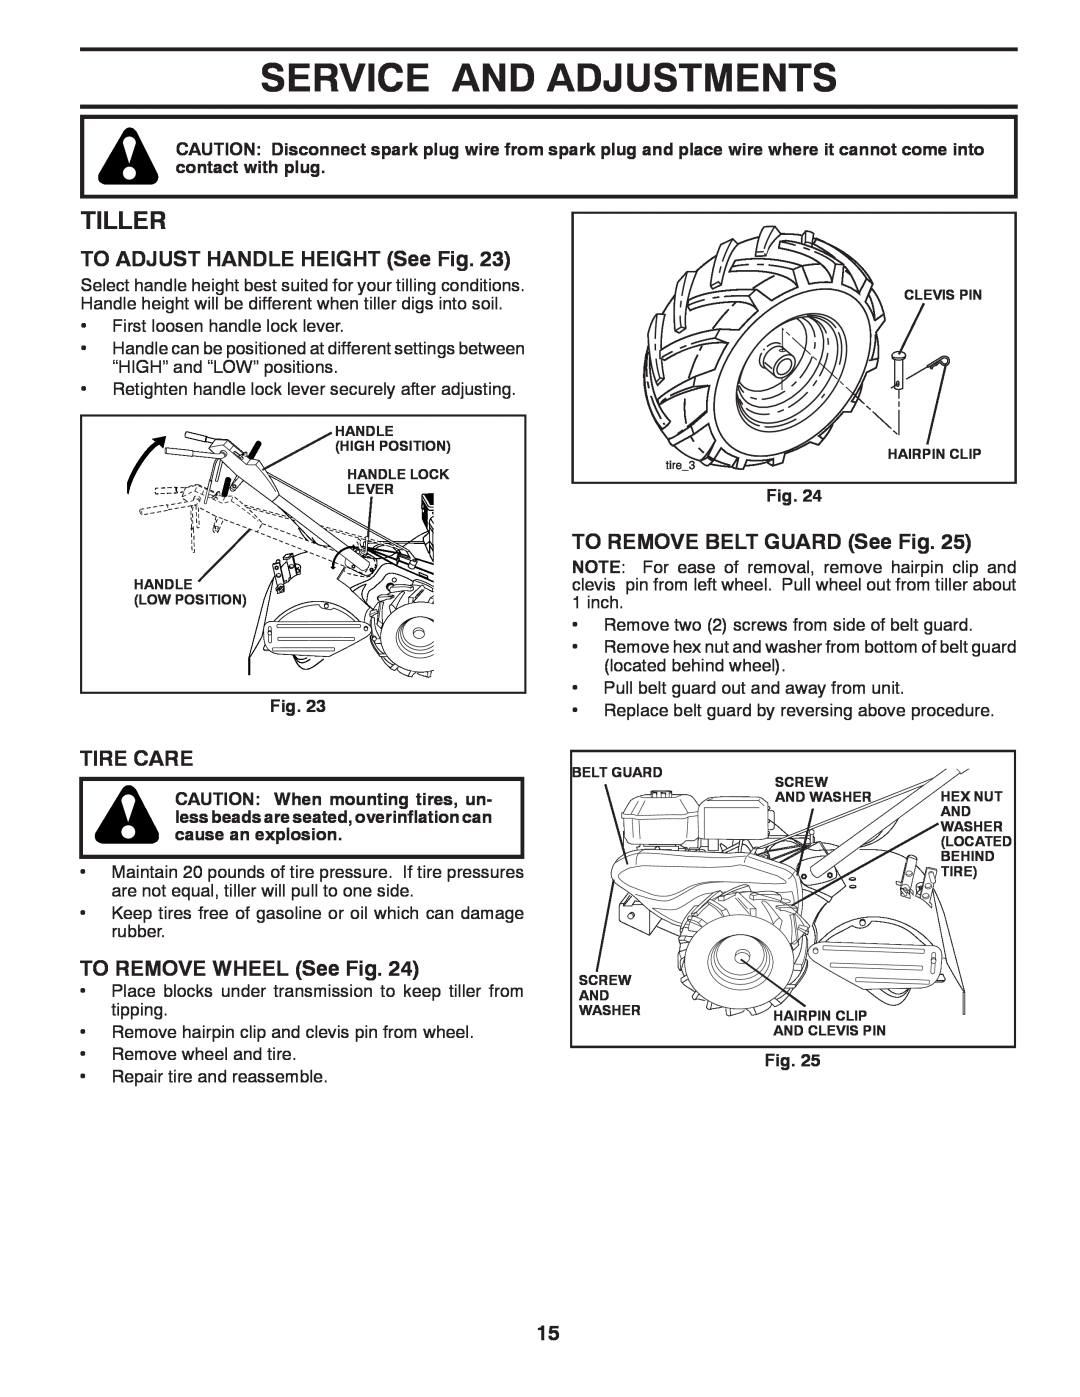 Husqvarna DRT900E Service And Adjustments, Tiller, TO ADJUST HANDLE HEIGHT See Fig, Tire Care, TO REMOVE WHEEL See Fig 